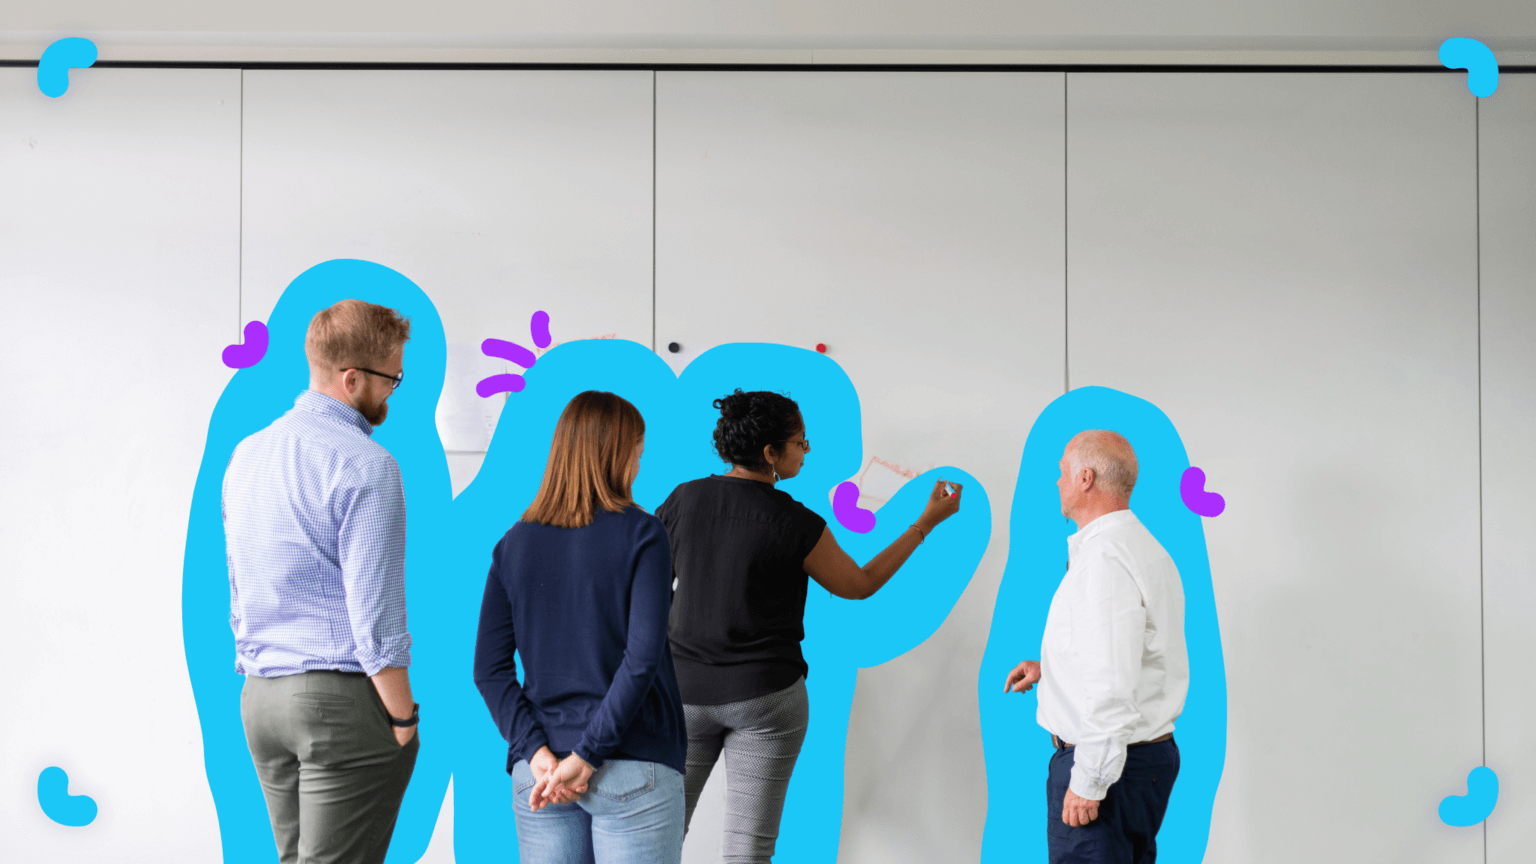 Four people stand in front of a whiteboard, with one person writing on it while the others observe. Blue silhouettes with purple and blue marks highlight their positions, creating a scene reminiscent of a business organization chart in action.